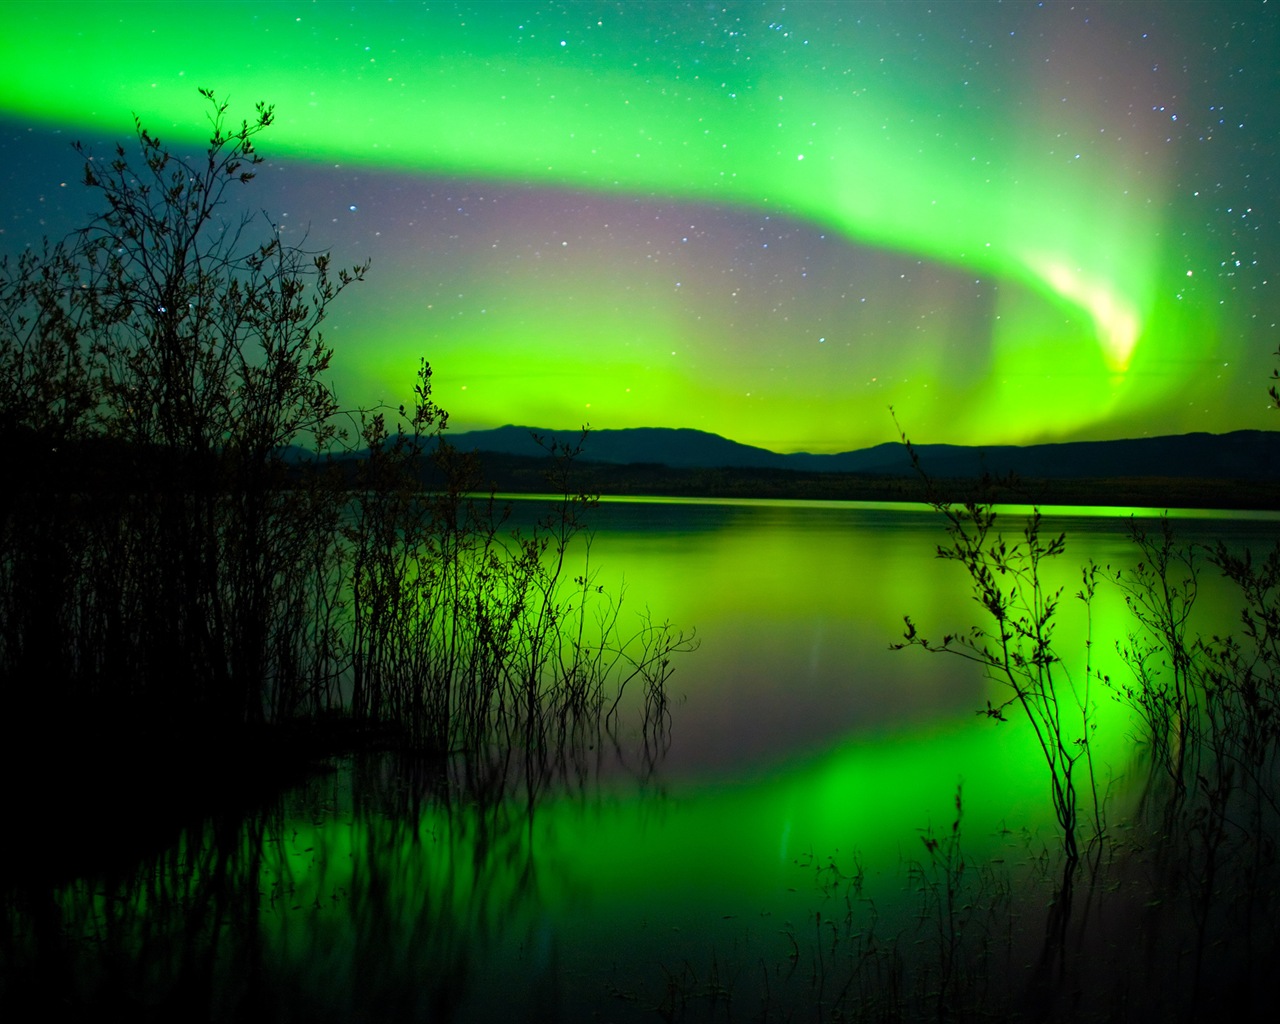 Natural wonders of the Northern Lights HD Wallpaper (2) #12 - 1280x1024